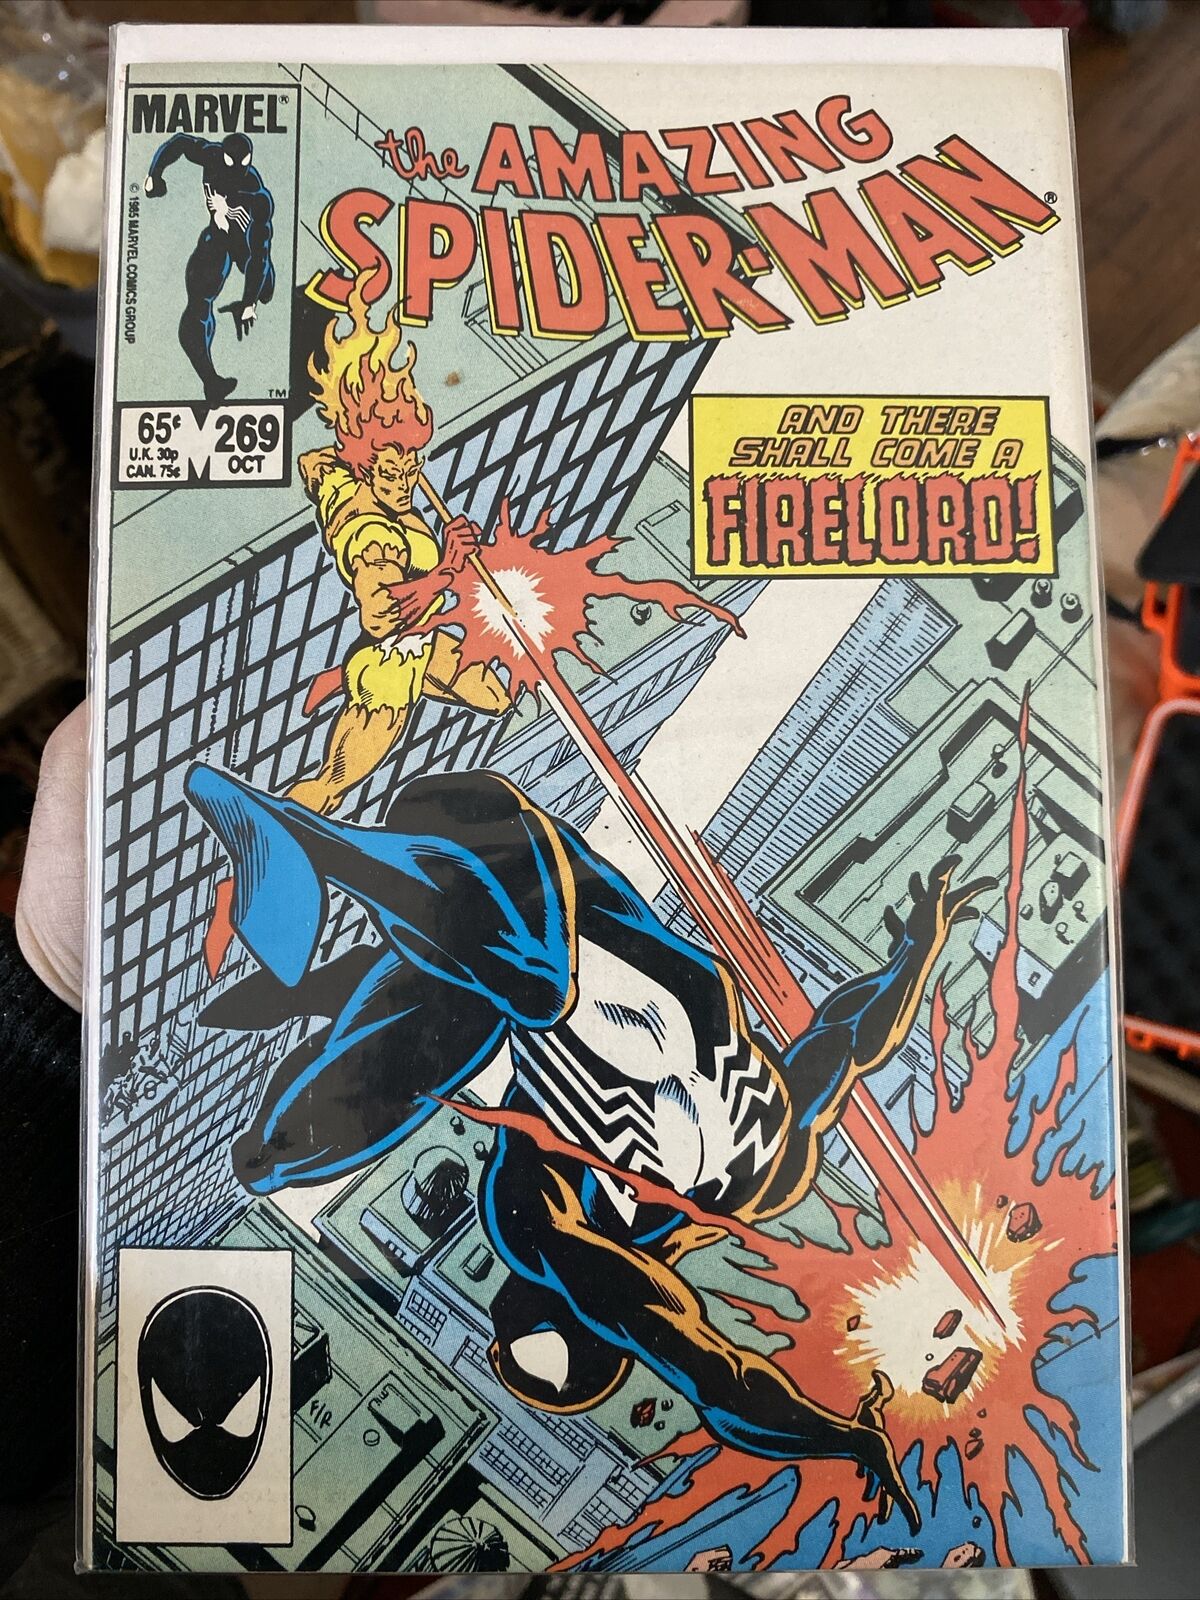 The Amazing Spider Man #269 (Marvel Oct 1985) Firelord